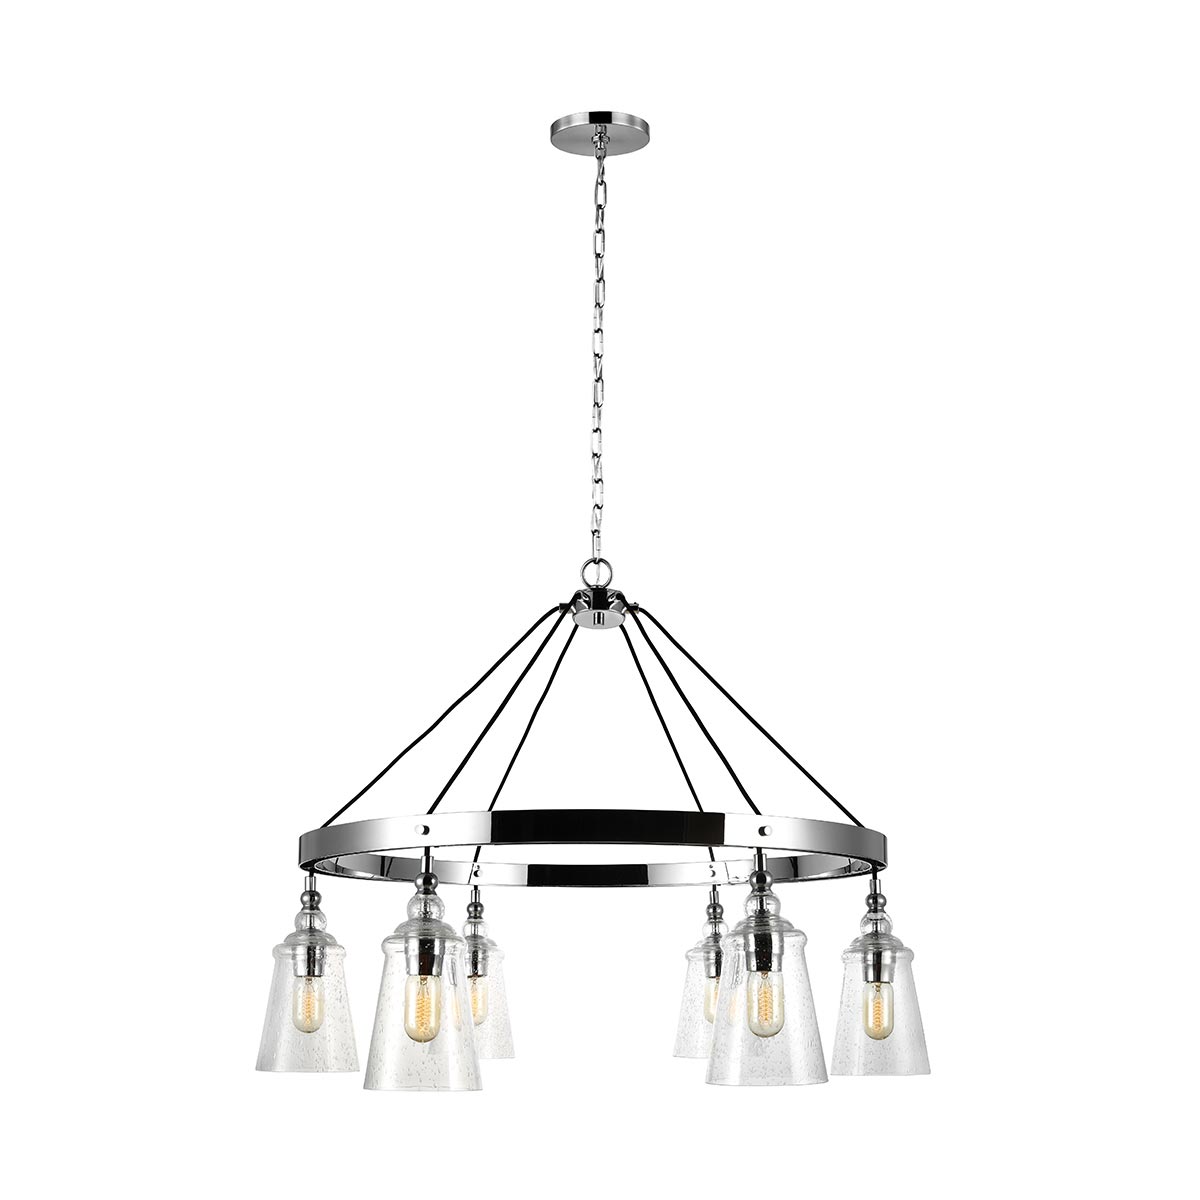 Loras Polished Chrome 6 Light Large Chandelier Seeded Glass Shades